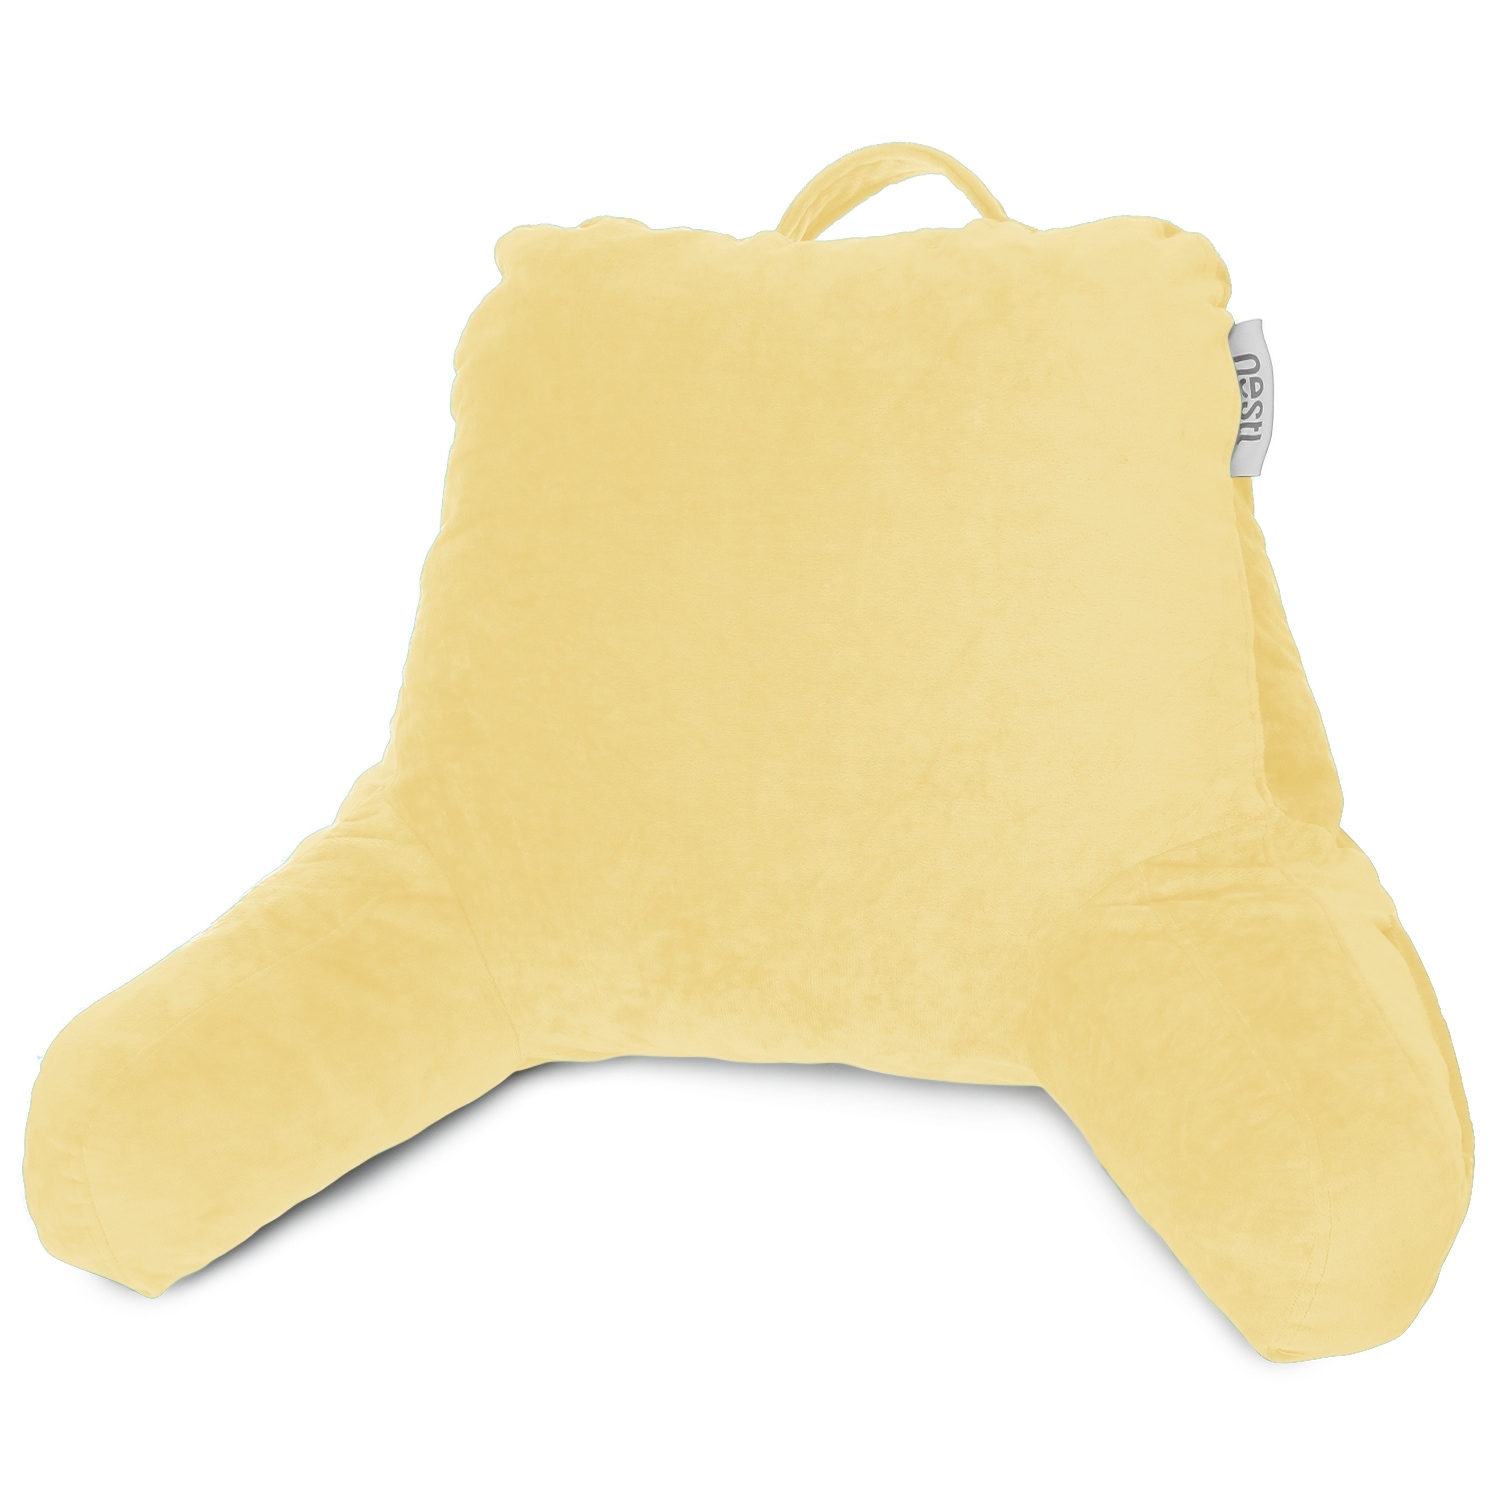 https://ak1.ostkcdn.com/images/products/is/images/direct/a51f882f6f7d5a58e6e2d764e95b01c36e9d5855/Nestl-Backrest-Reading-Pillow-with-Arms---Shredded-Memory-Foam-Back-Support-Bed-Rest-Pillow.jpg